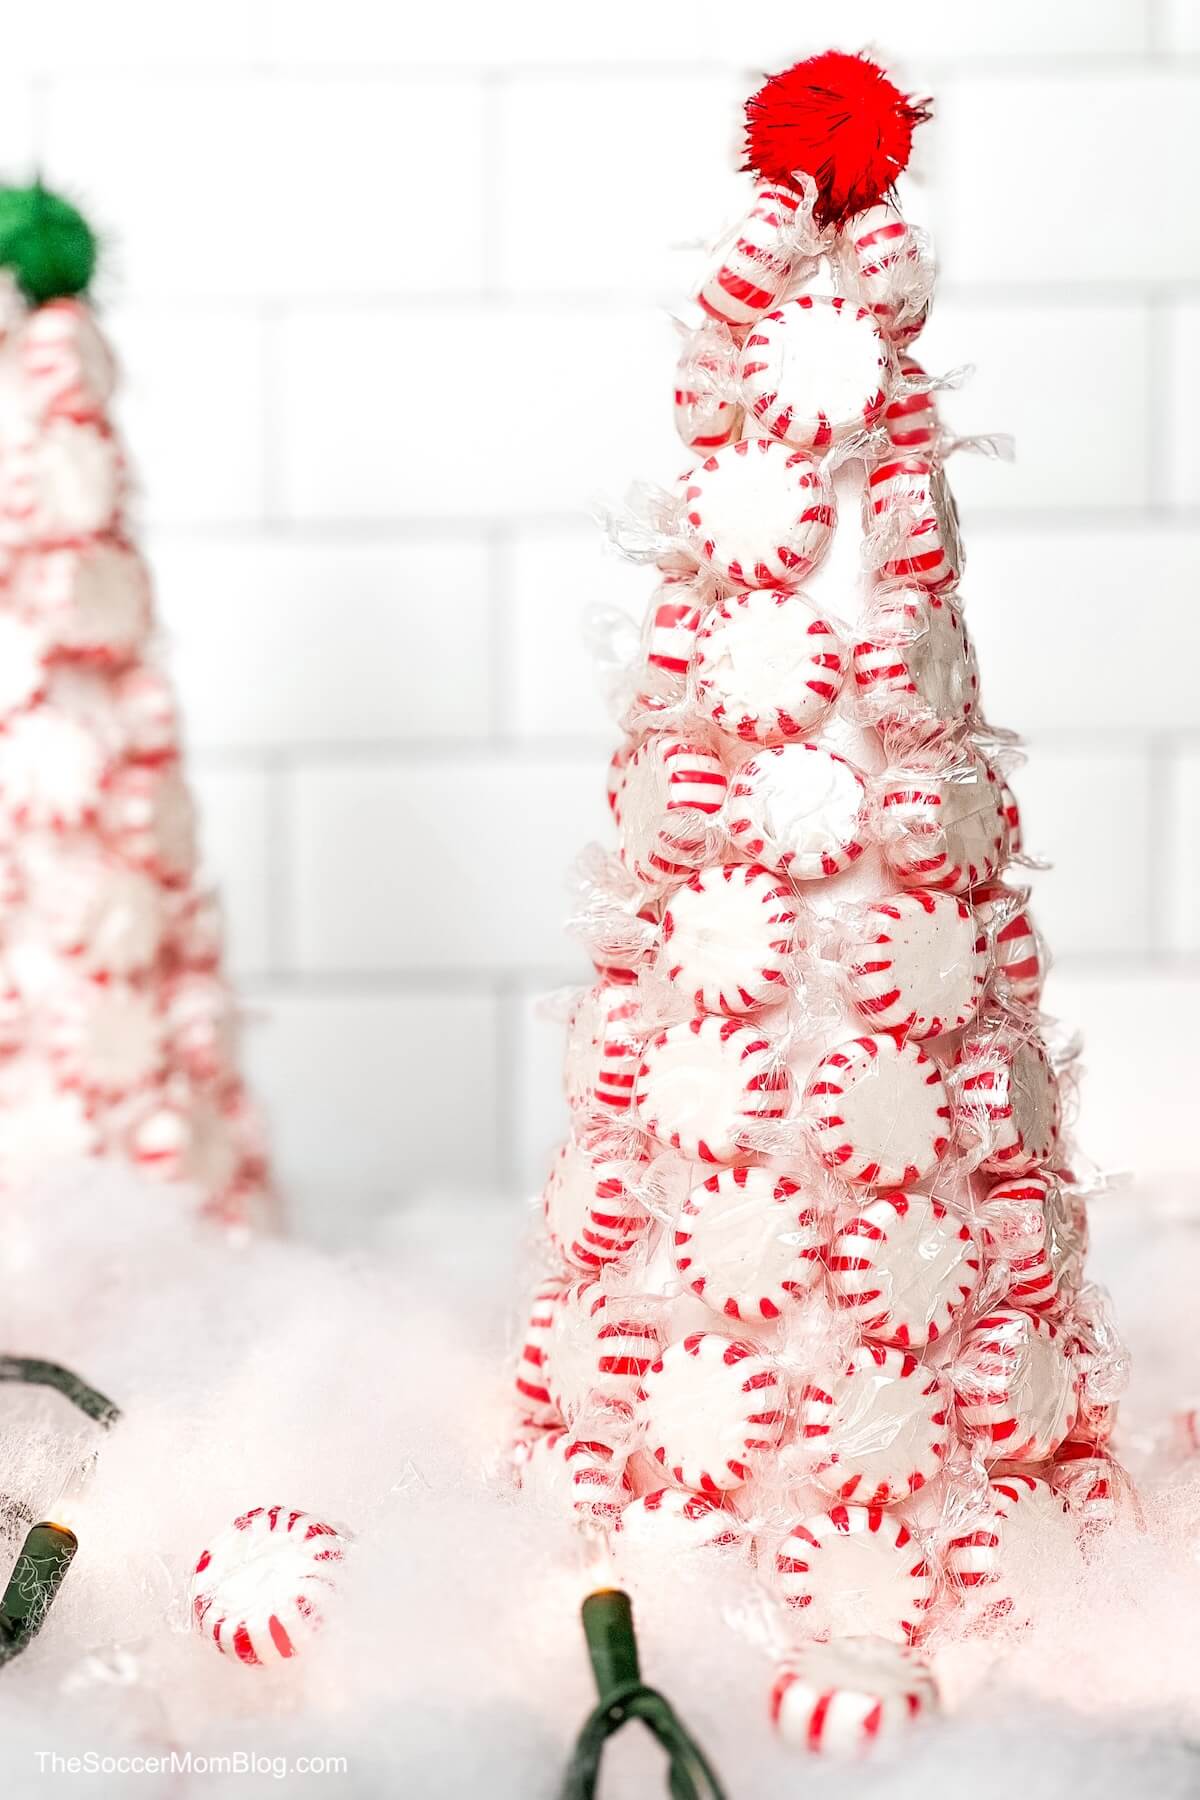 two Christmas trees made with peppermints, surrounded by decorative snow, lights, and mints.